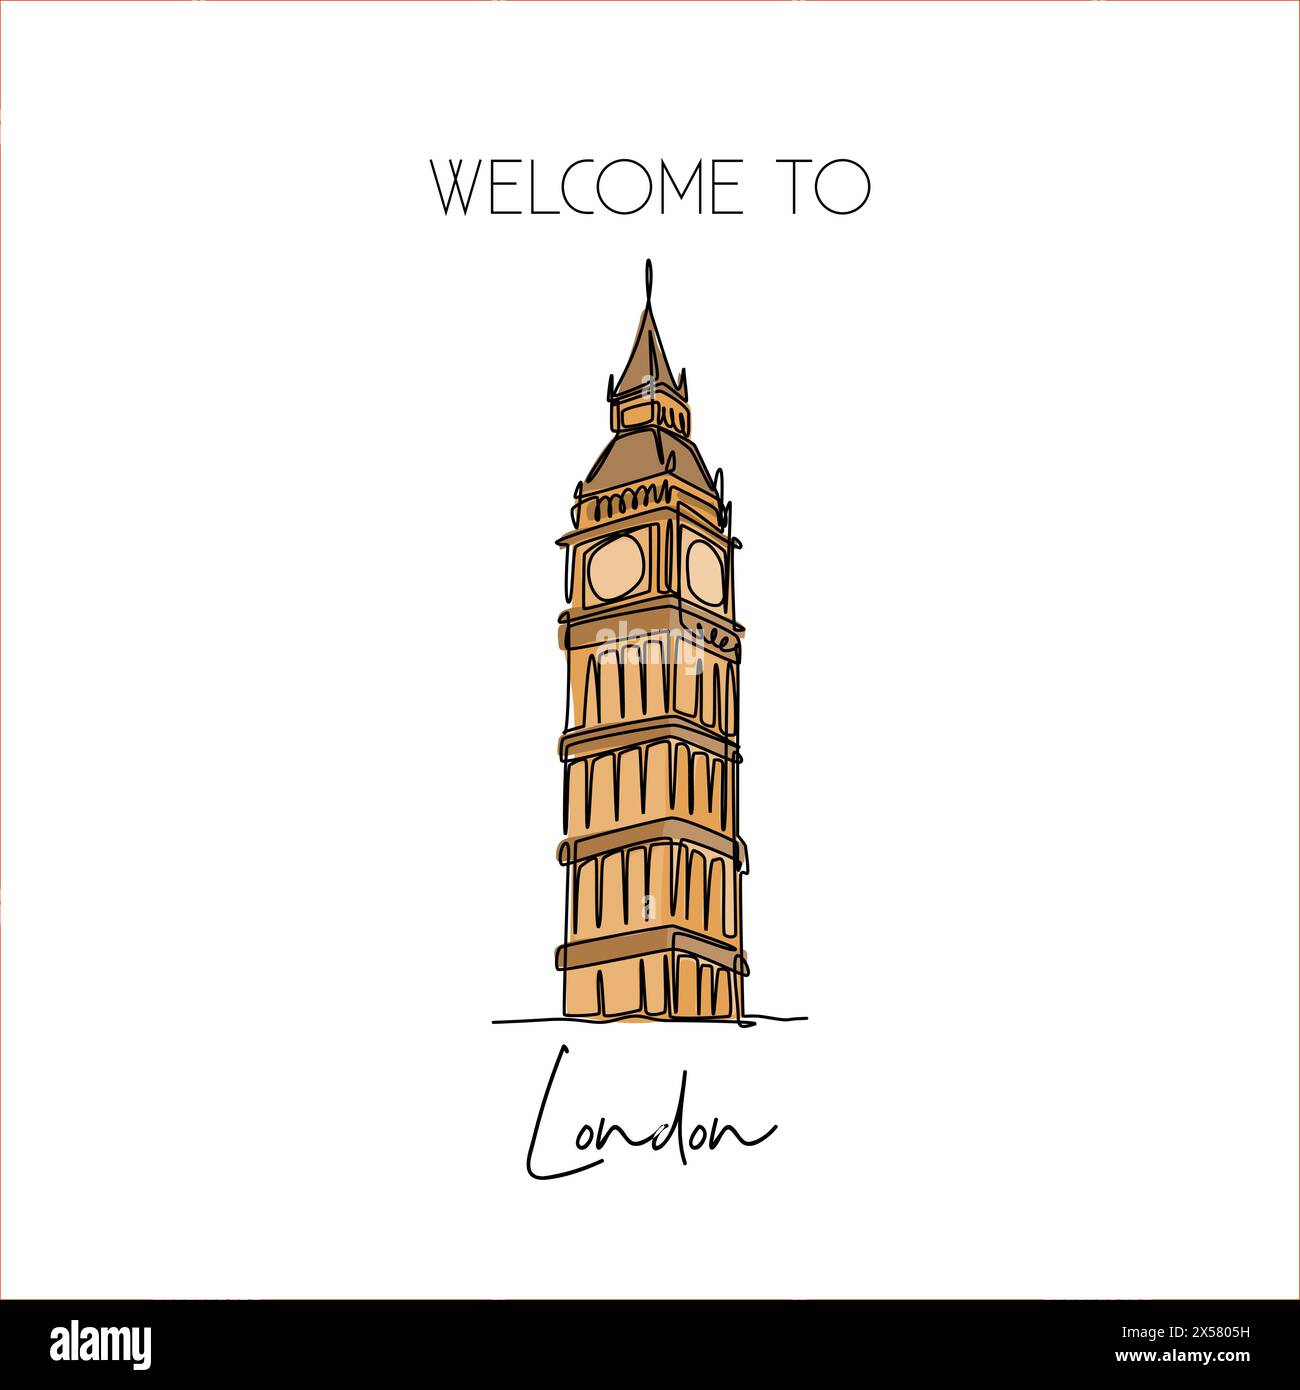 Single continuous line drawing of Big Ben clock tower landmark. Historical iconic beauty place in London. Home decor wall art poster print concept. Mo Stock Vector